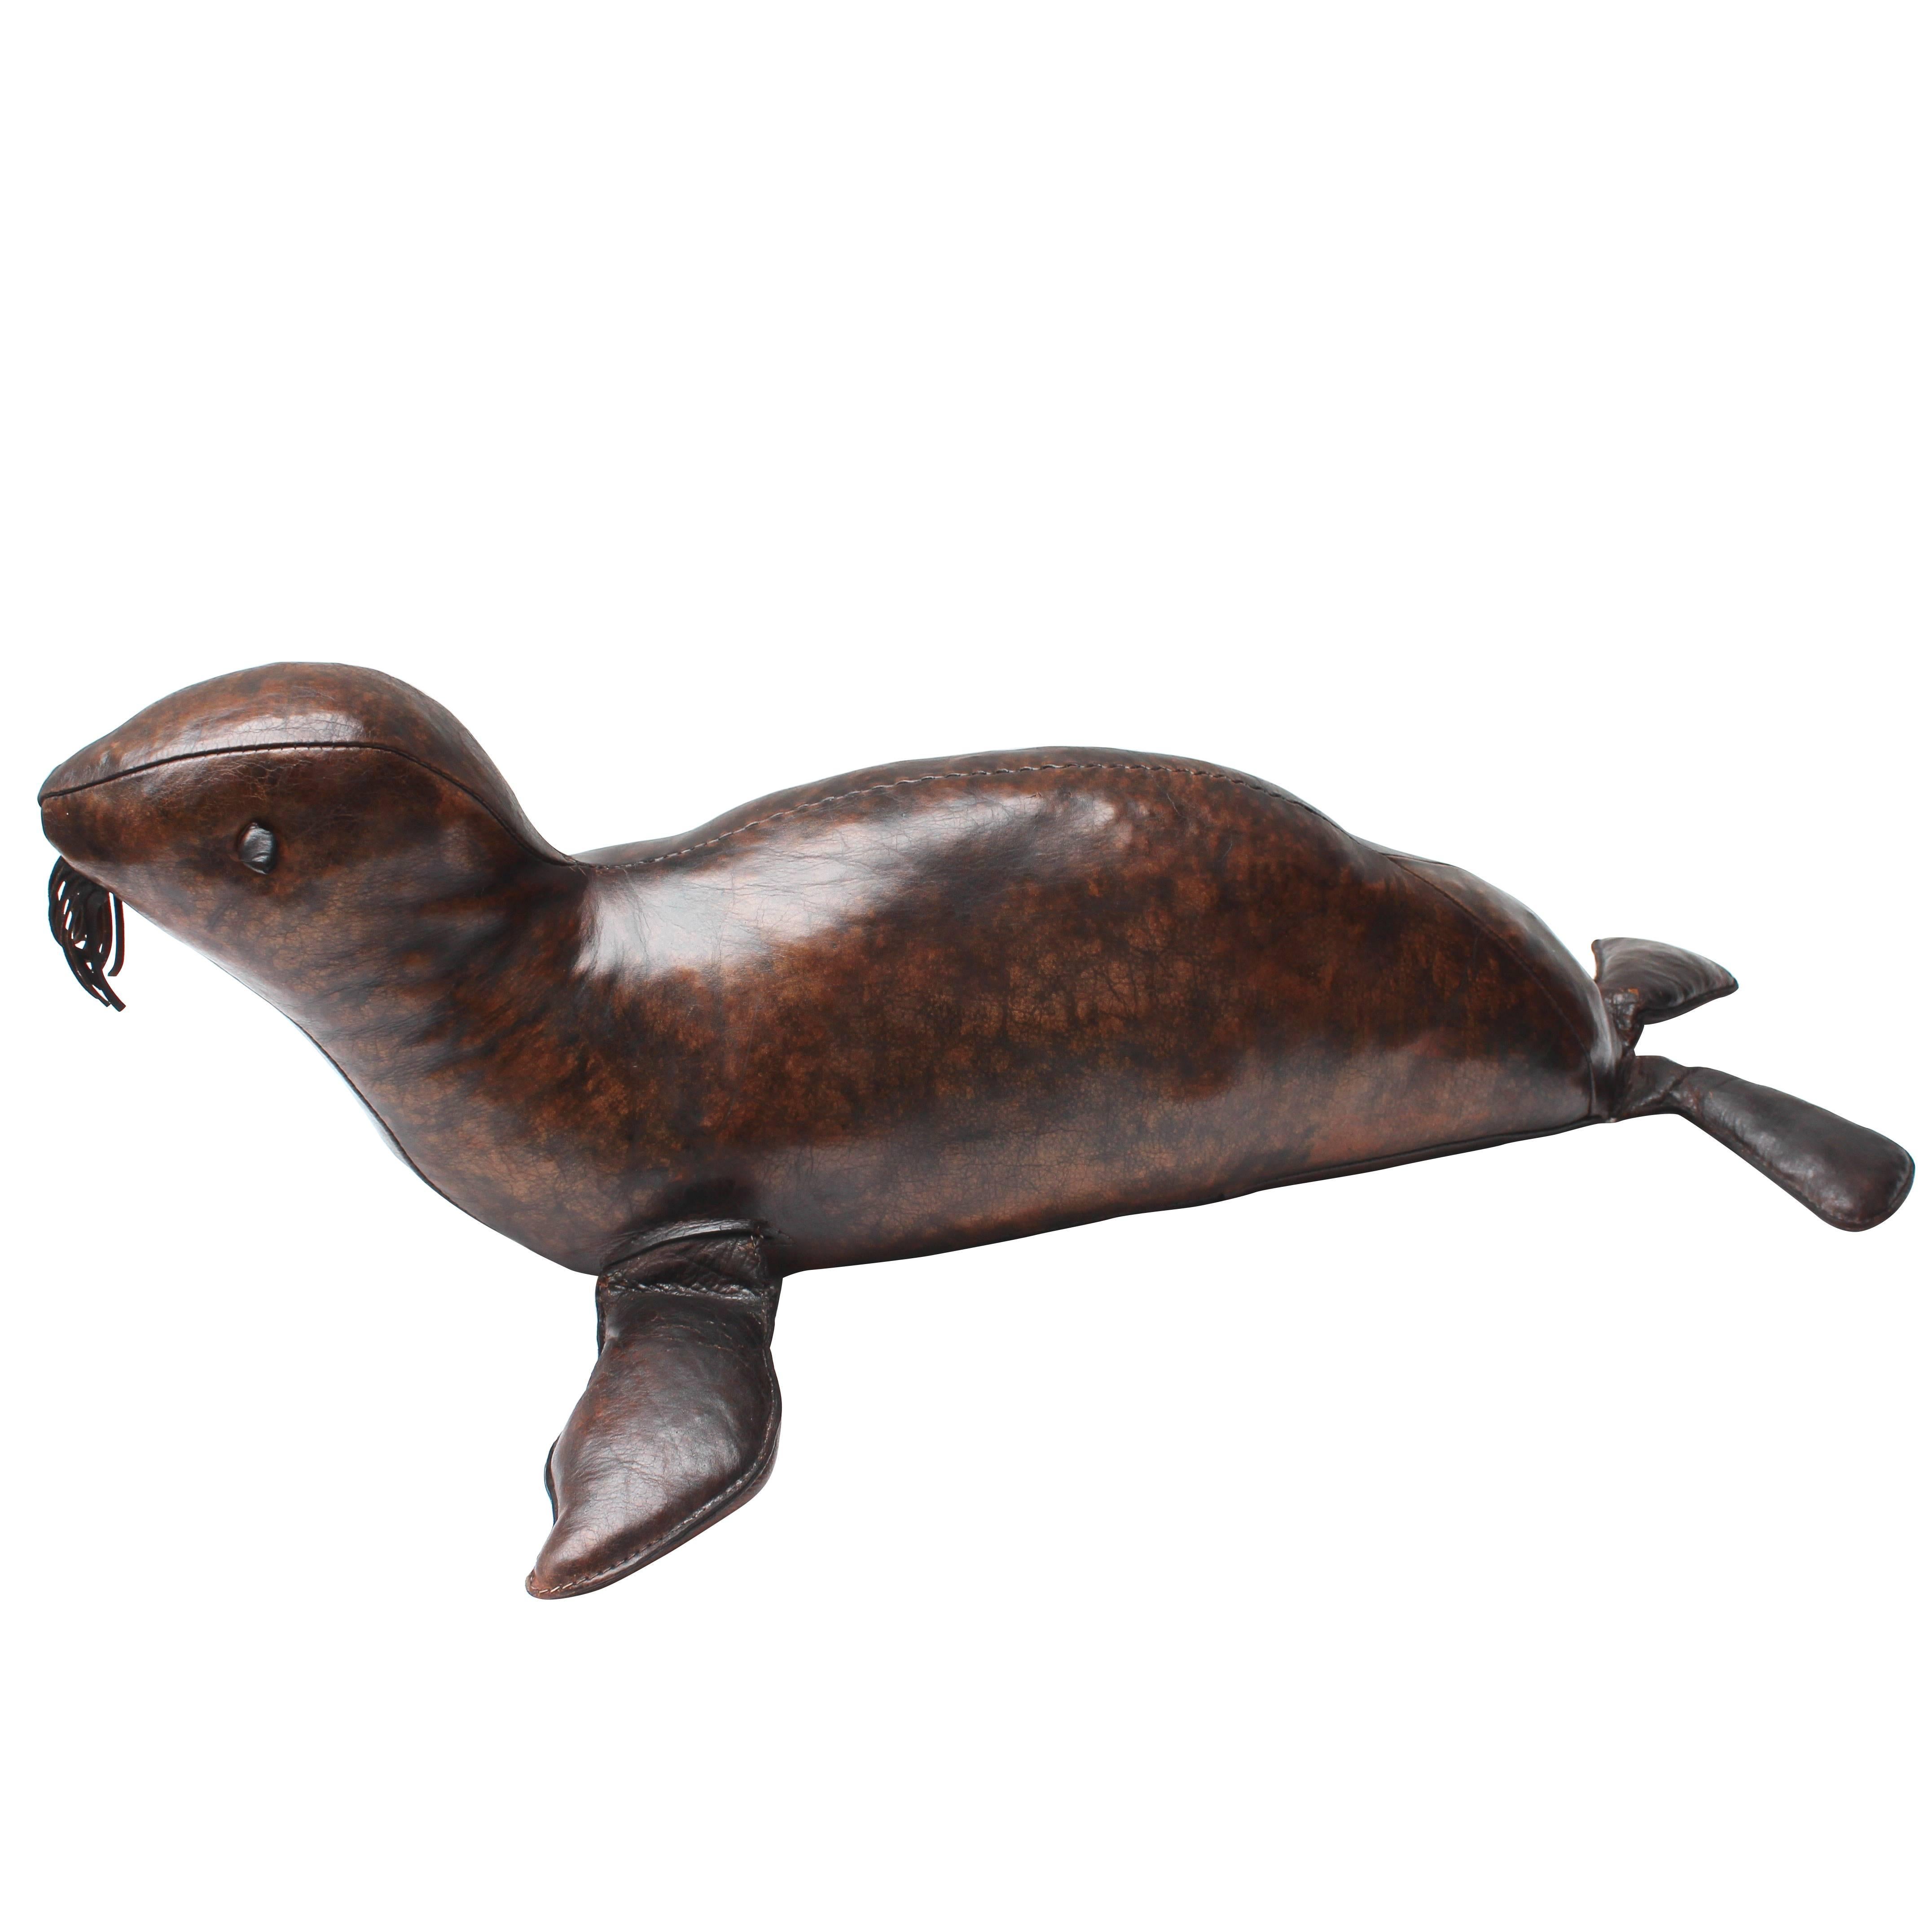 Abercrombie and Fitch Leather Seal Sculpture